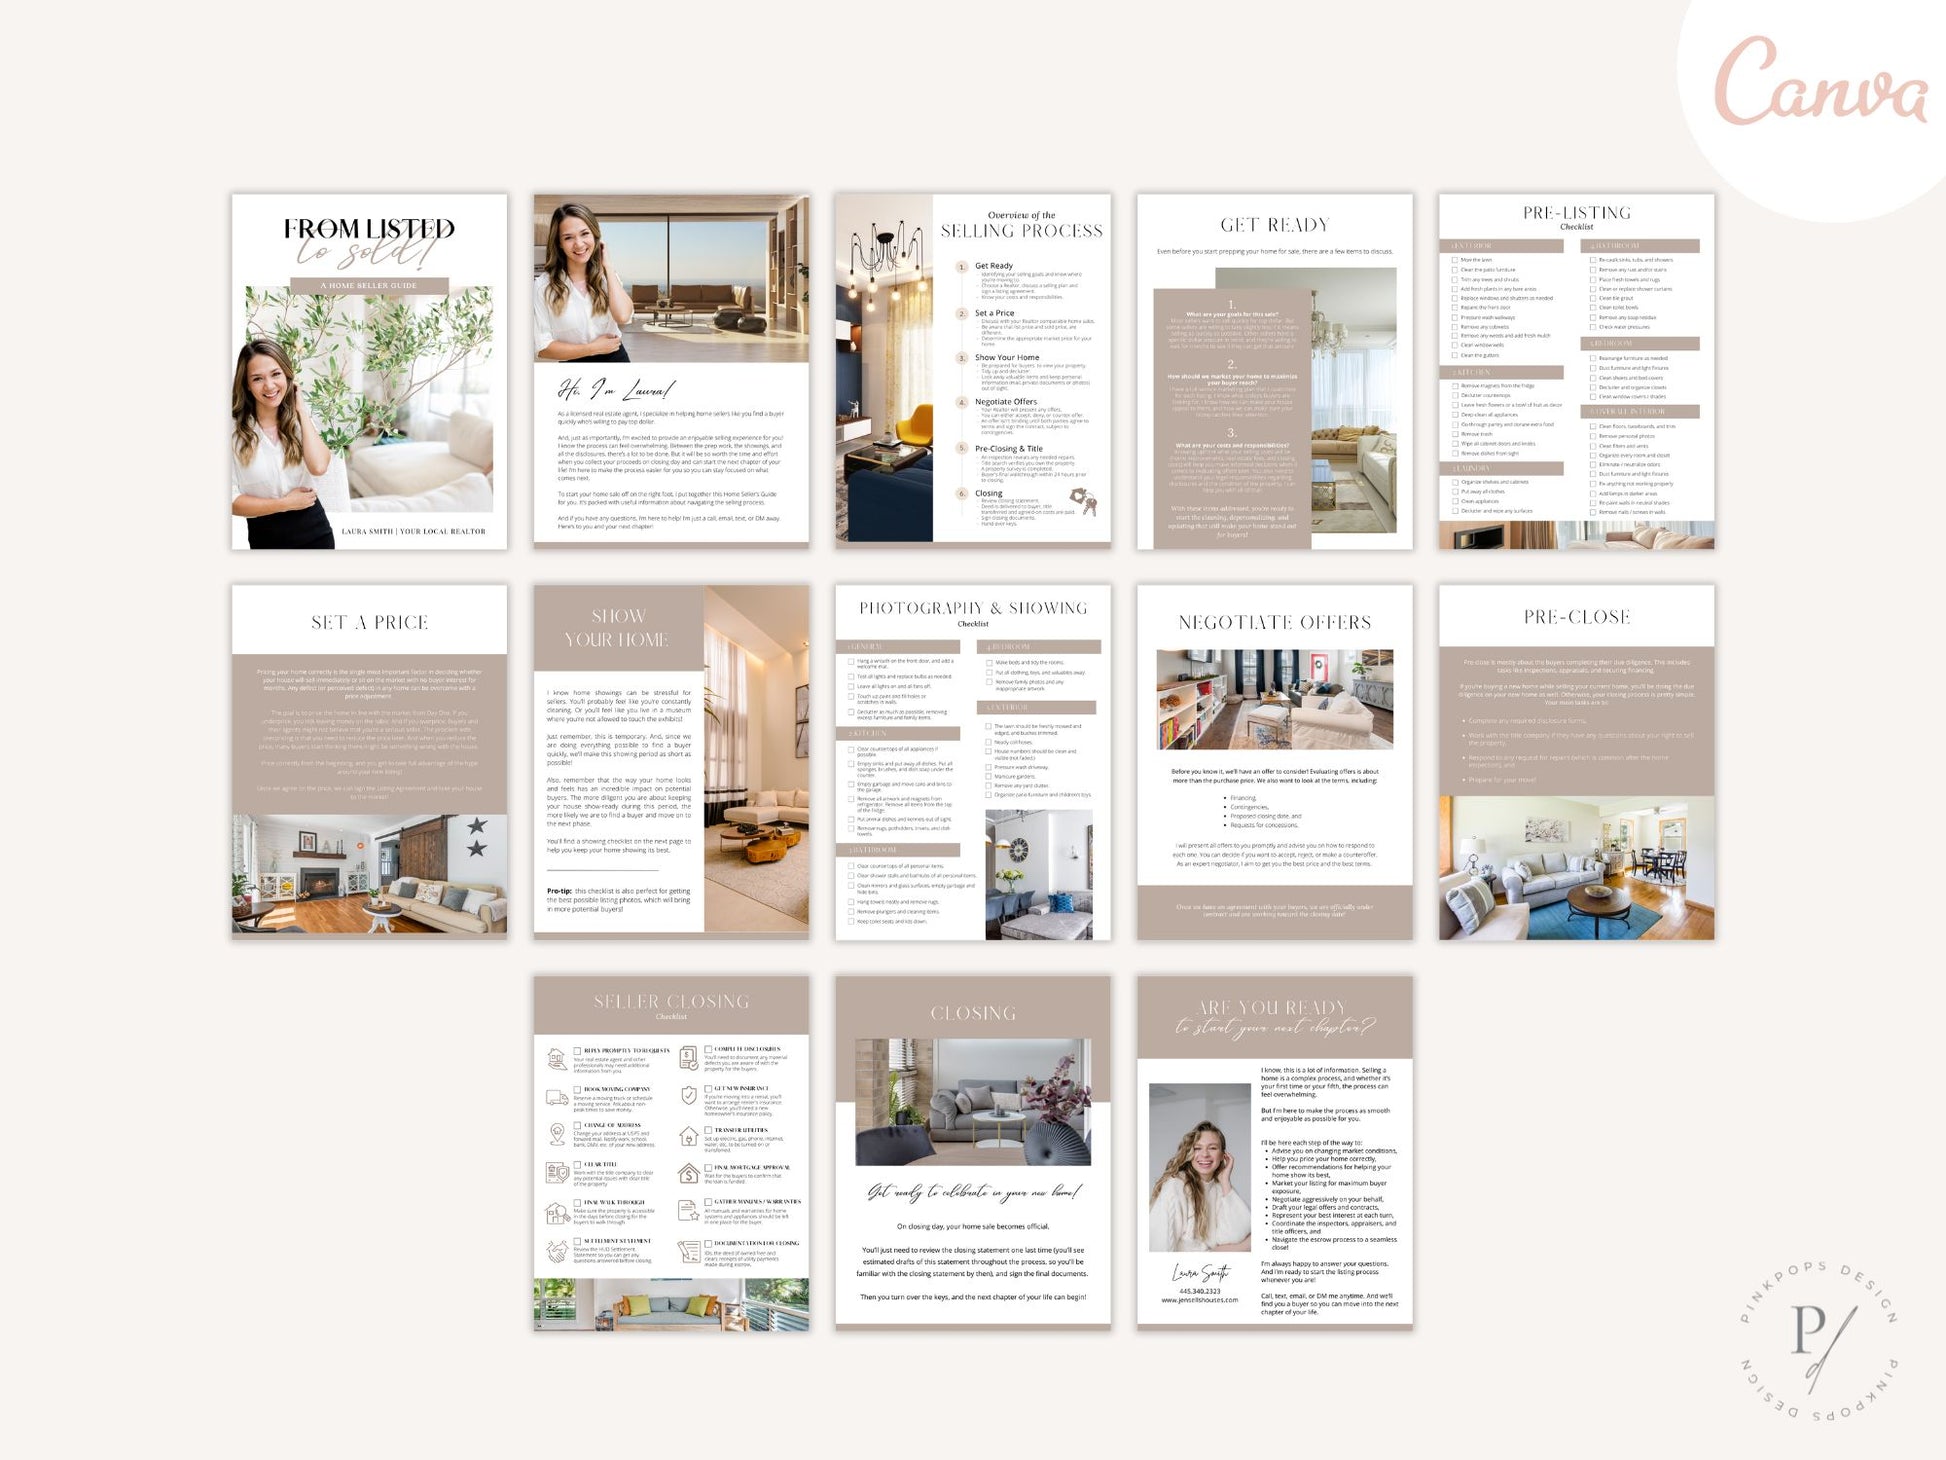 Modern Buyer and Seller Guides Vol 01- Essential insights for a modern real estate journey.